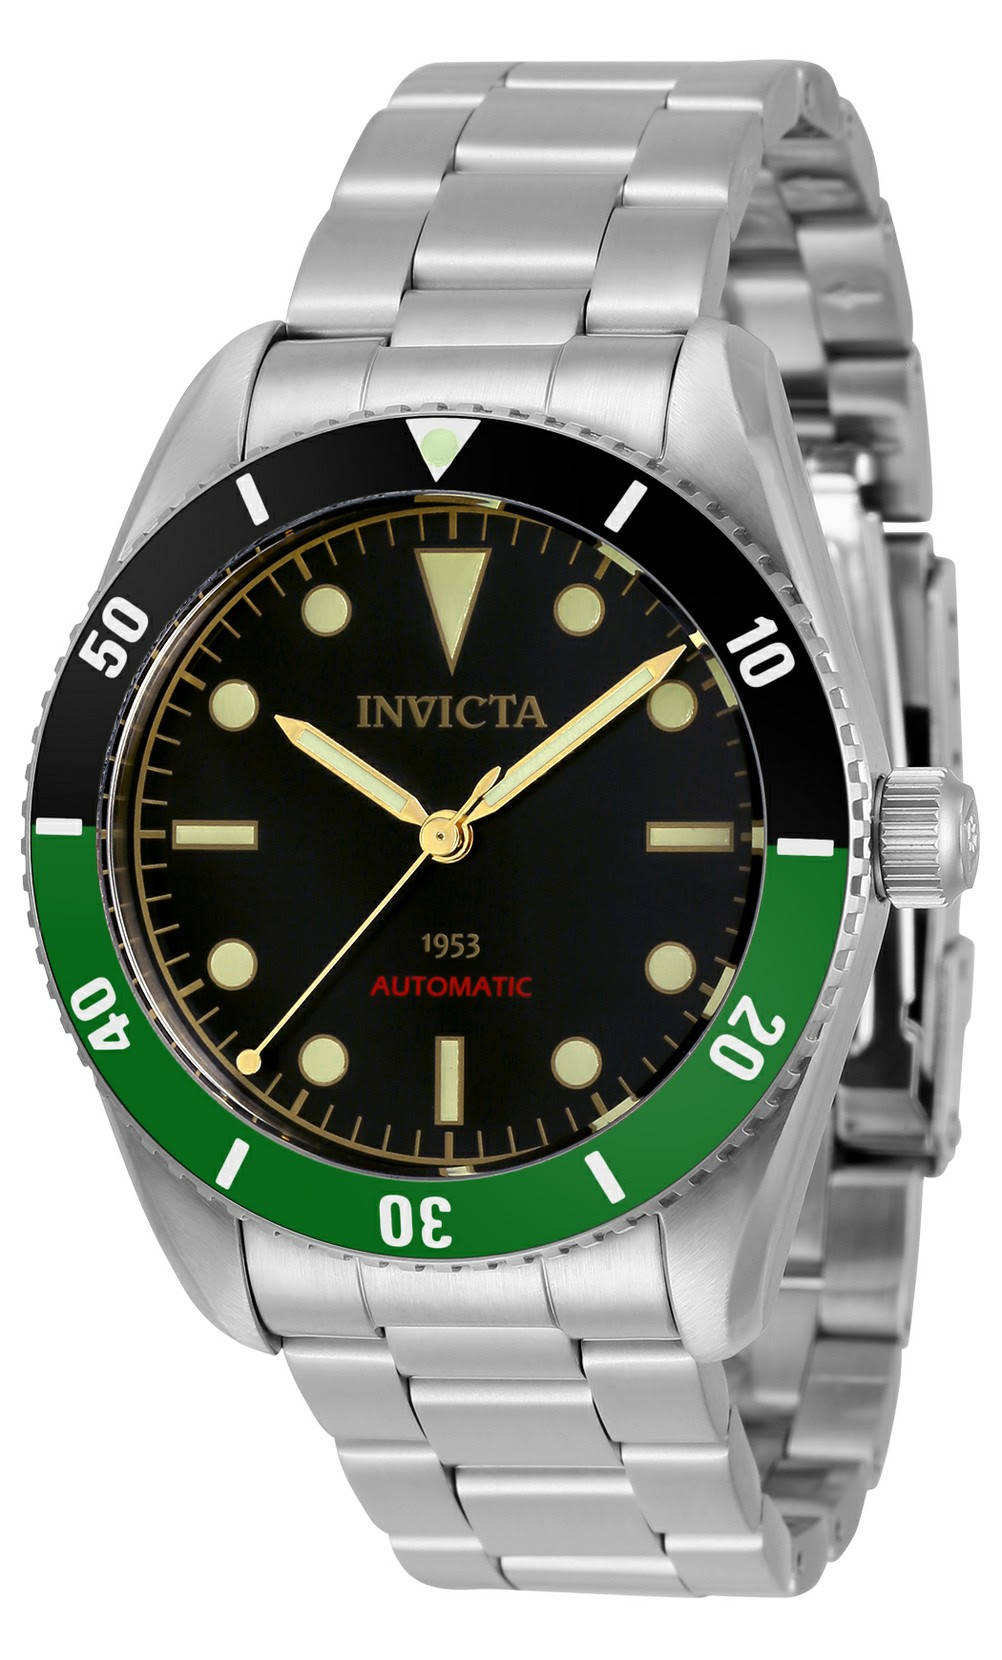 Invicta Pro Diver Automatic Men's Watch - 40mm Stainless Steel Case, Stainless Steel Band, Steel (34335)